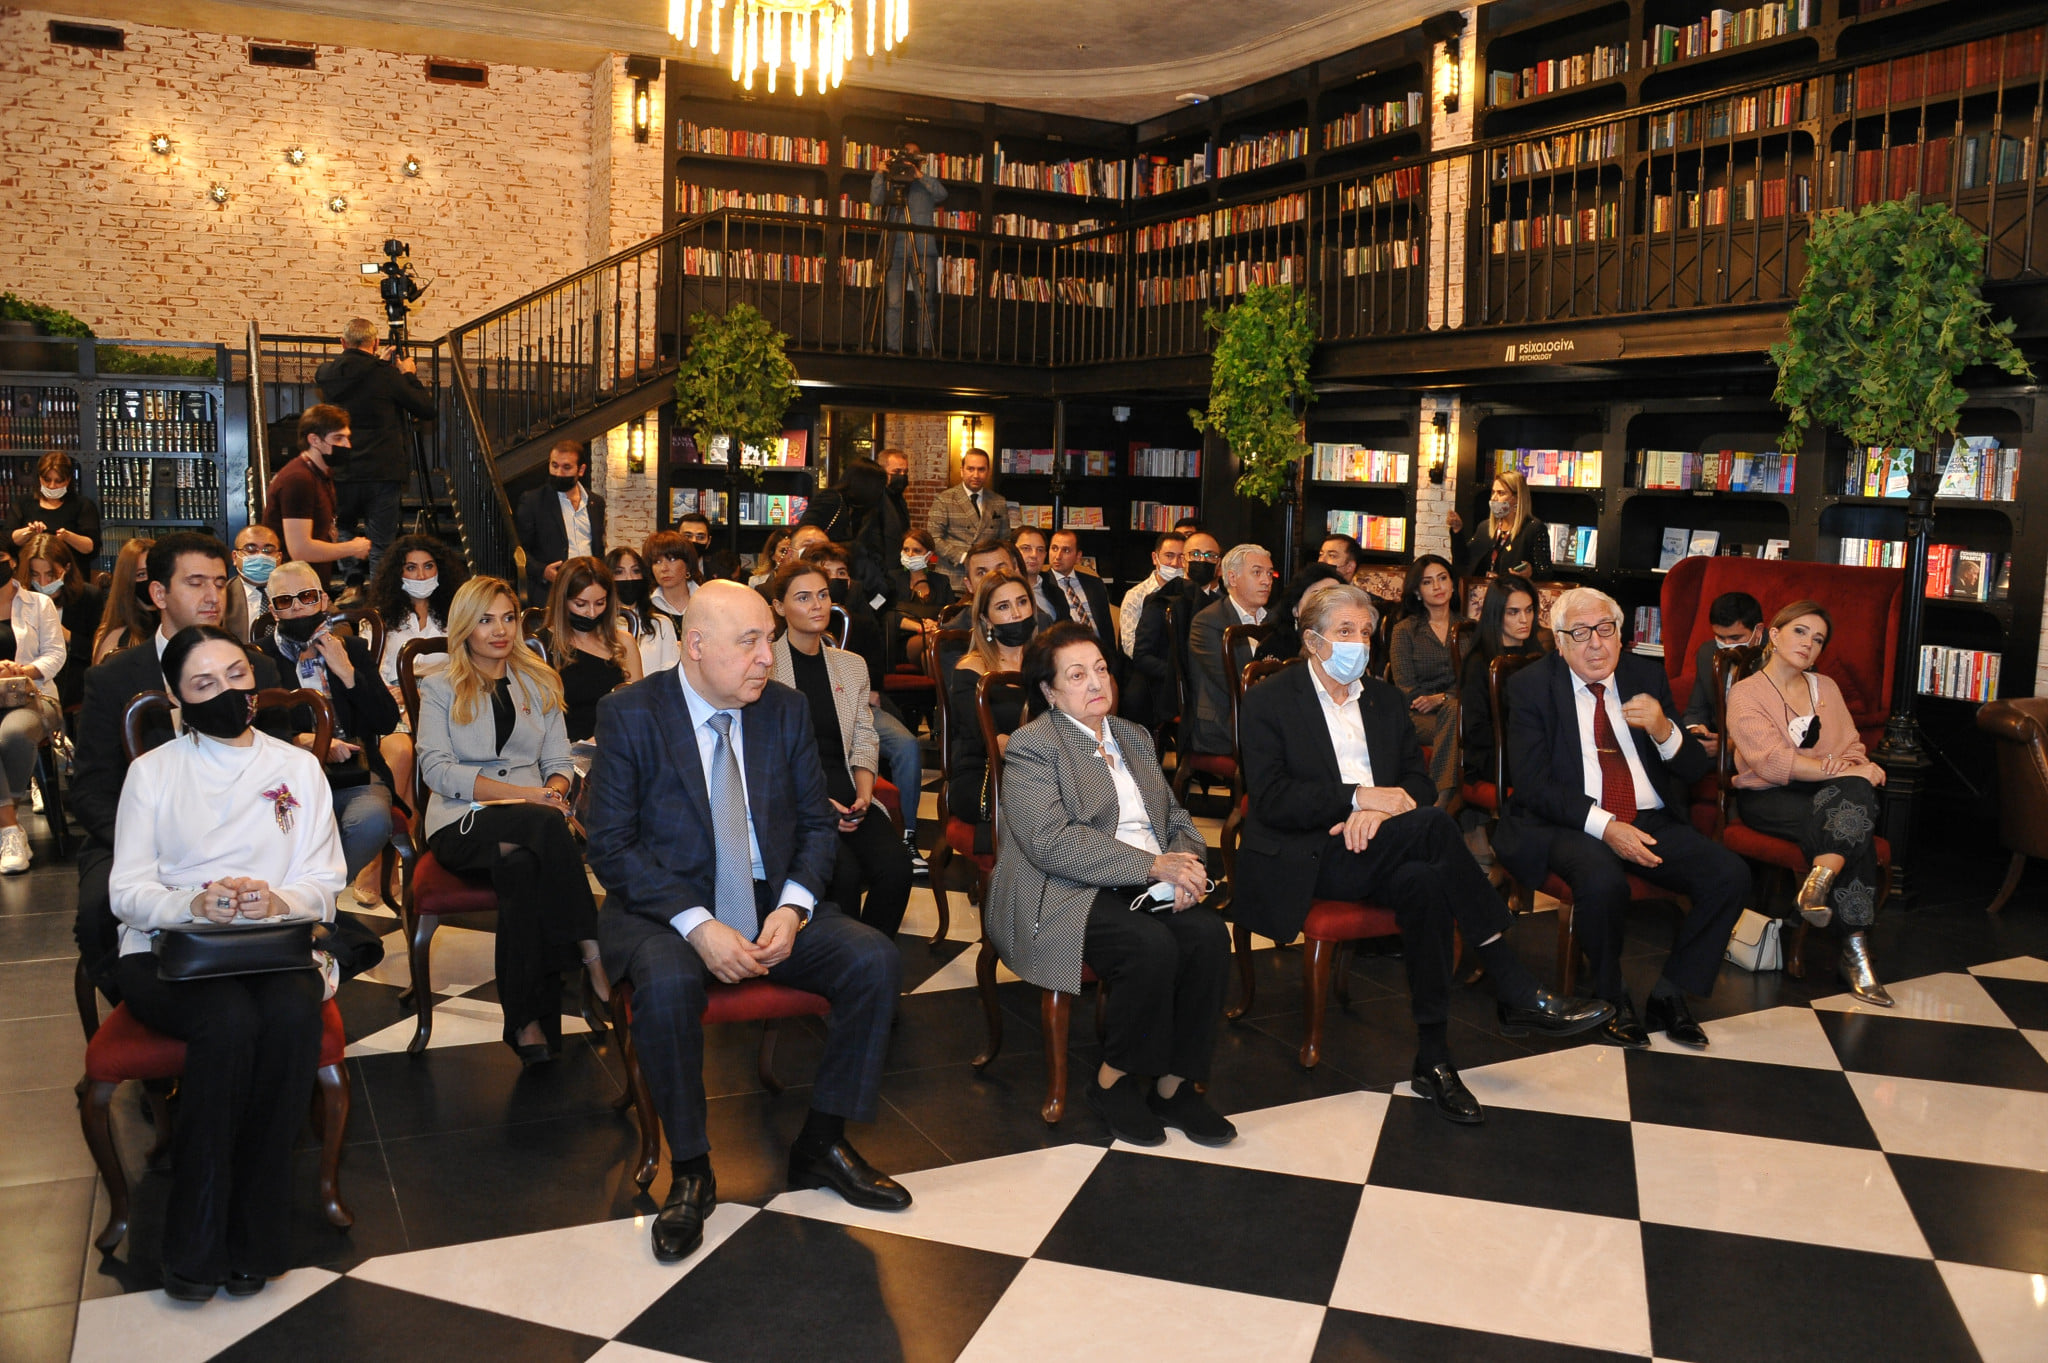 Baku Book Center unveils www.shusha.today website and marks Victory Day